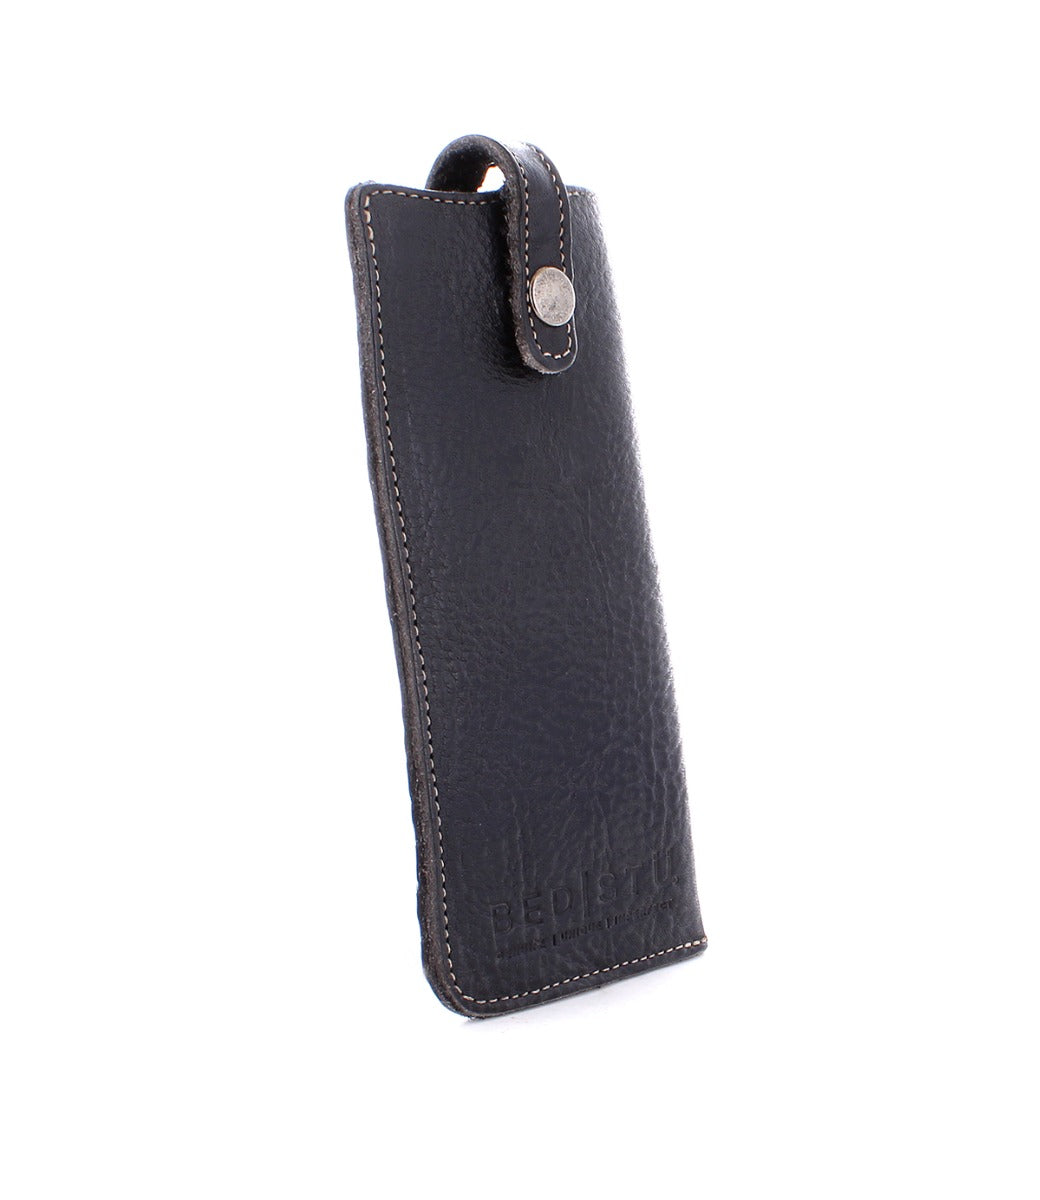 A black leather Behold phone case on a white background.